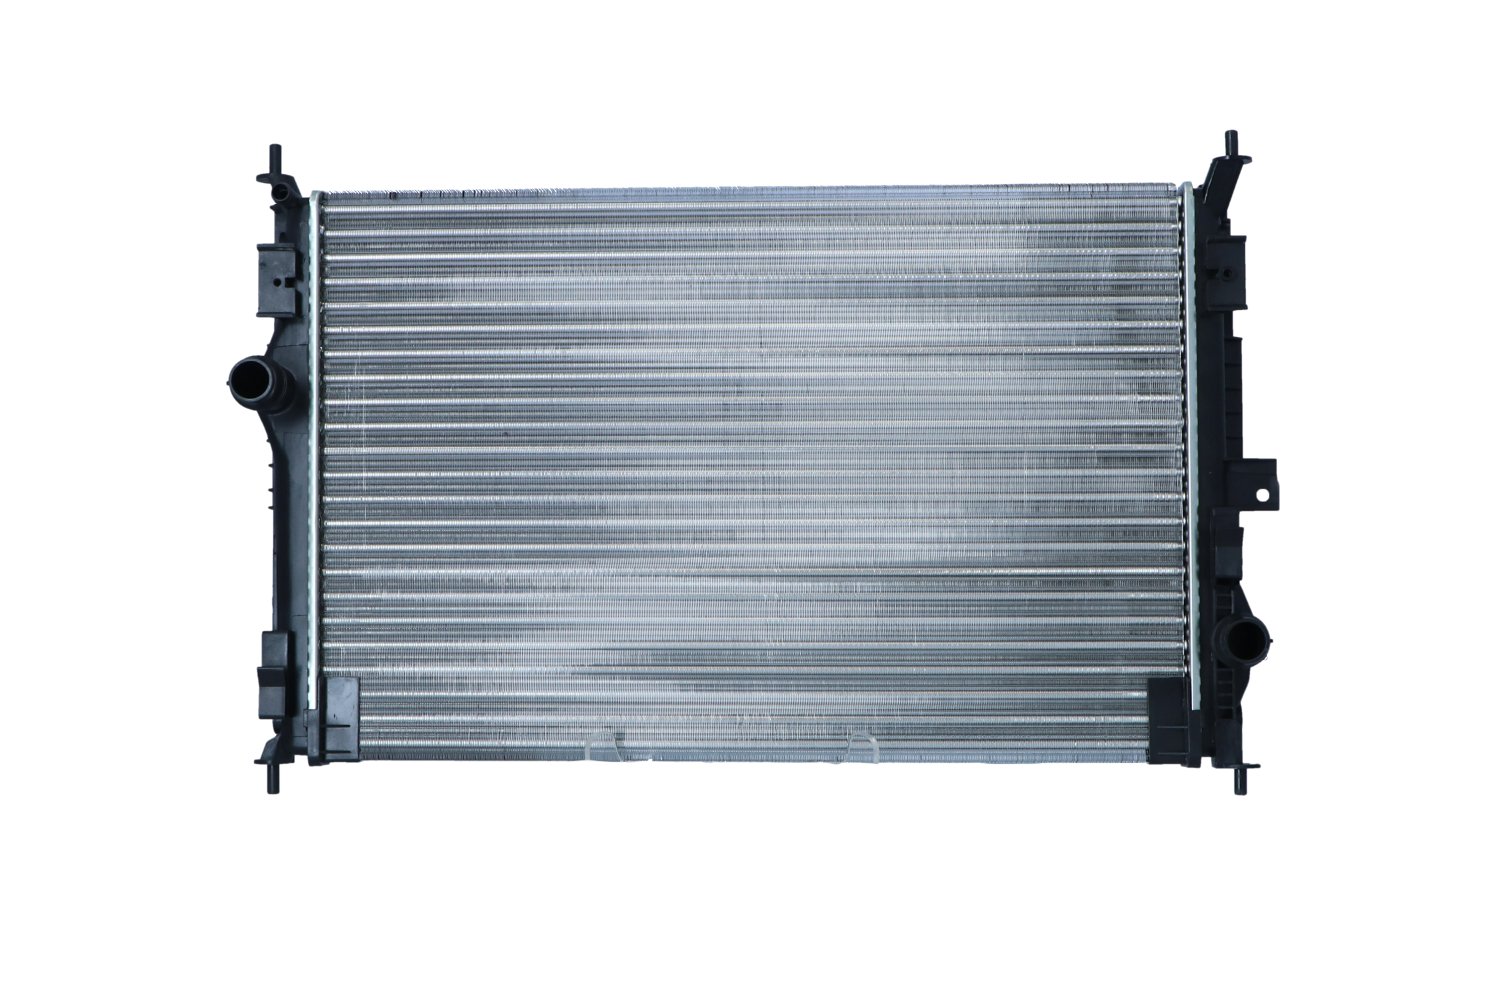 Opel Engine radiator NRF 59302A at a good price